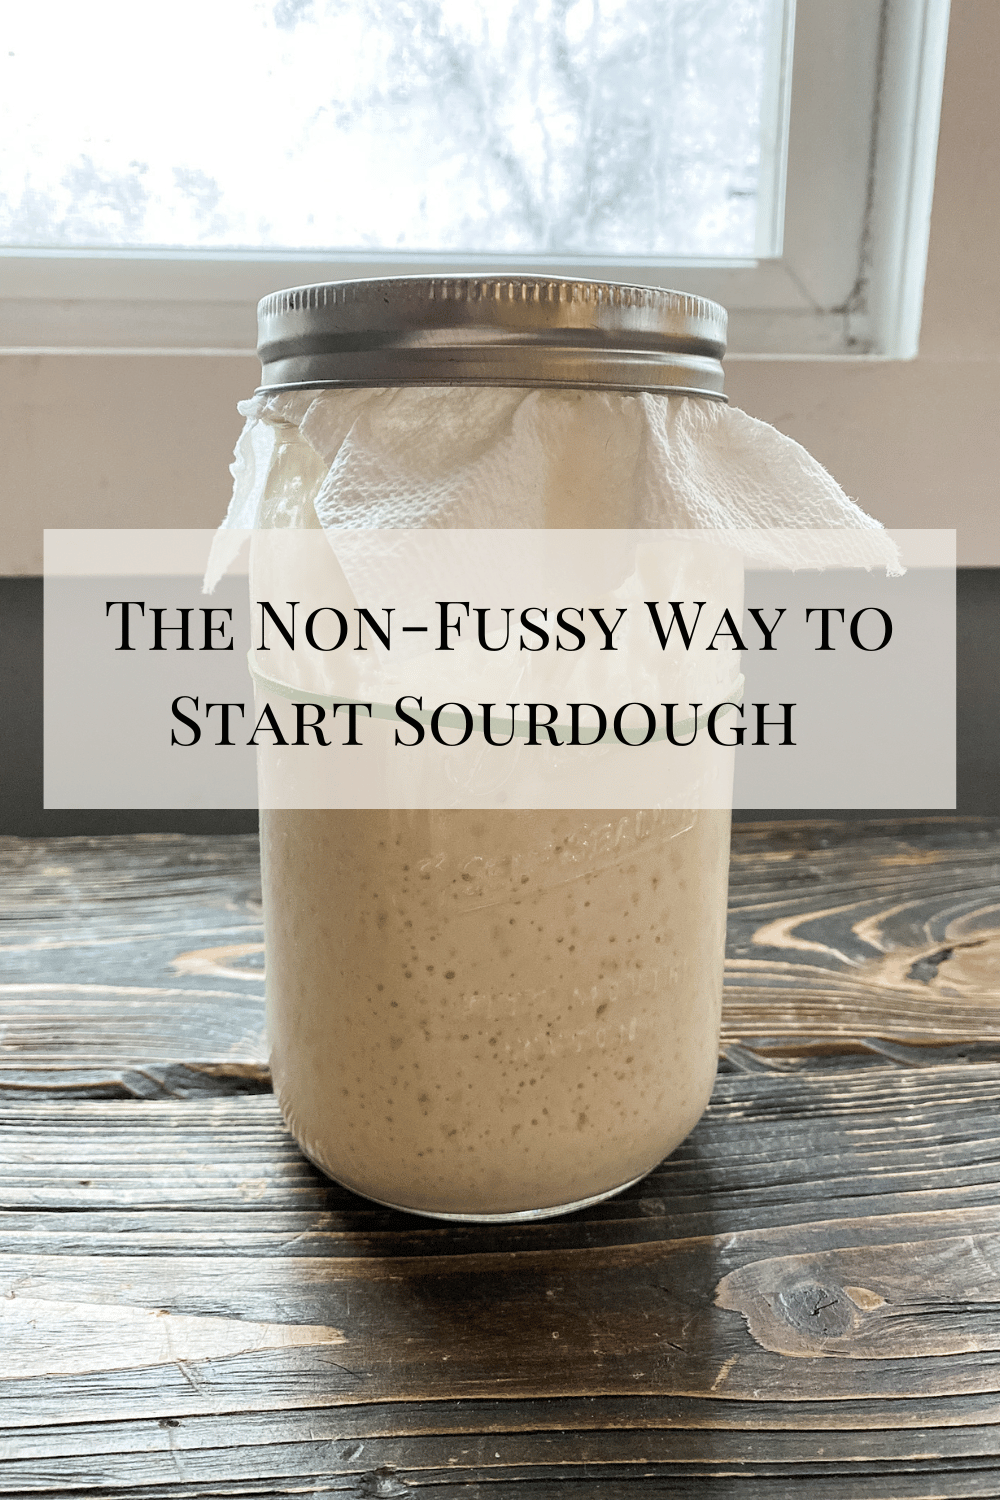 the Non-Fussy way to start sourdough